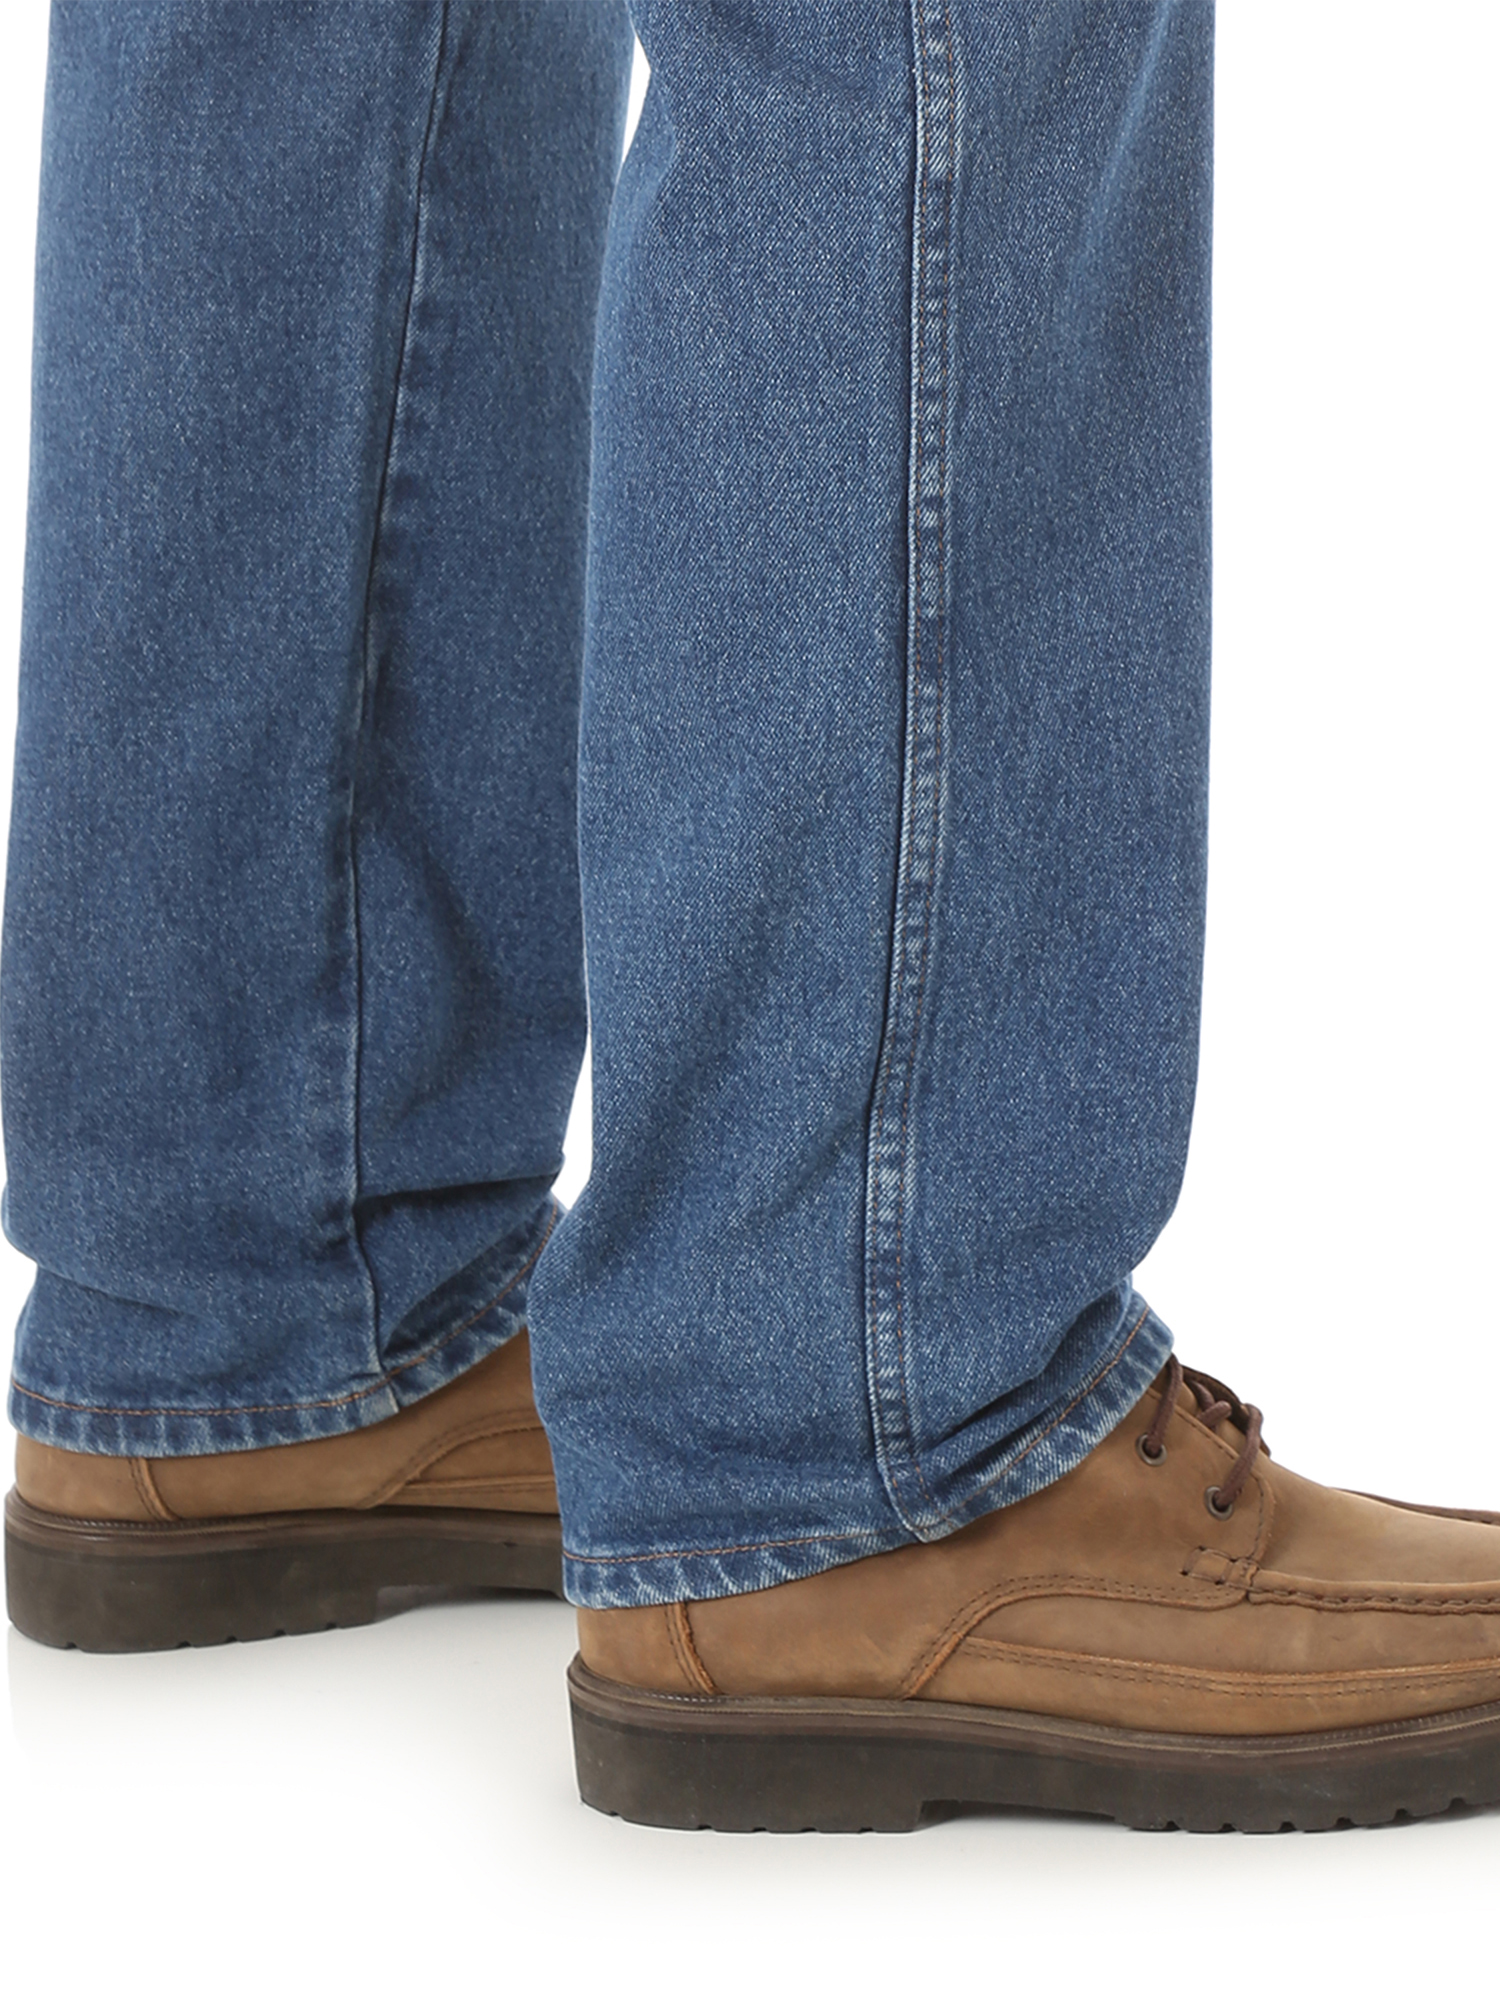 Wrangler Rustler Men's and Big Men's Relaxed Fit Jeans - image 5 of 5